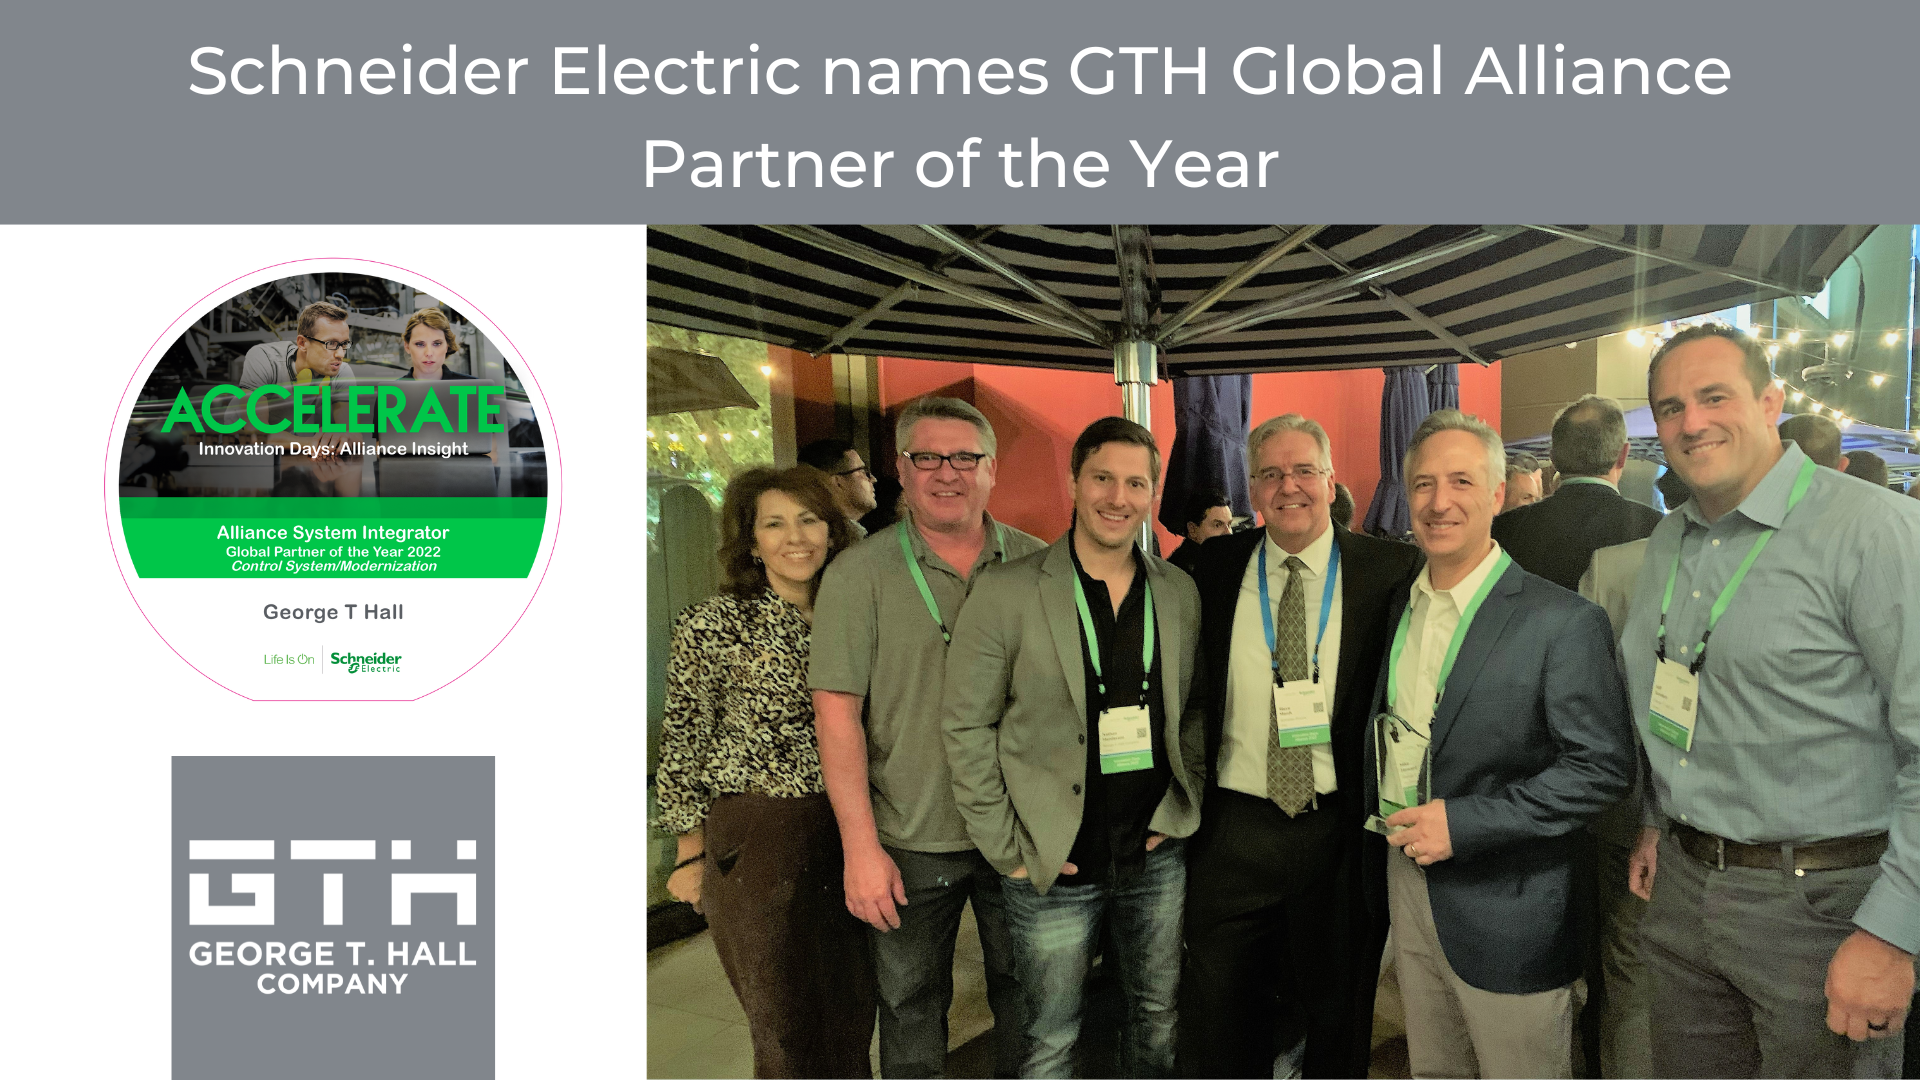 George T. Hall Company is awarded the Schneider Electric Global Alliance Partner of the Year Award for outstanding growth in Control System Modernization